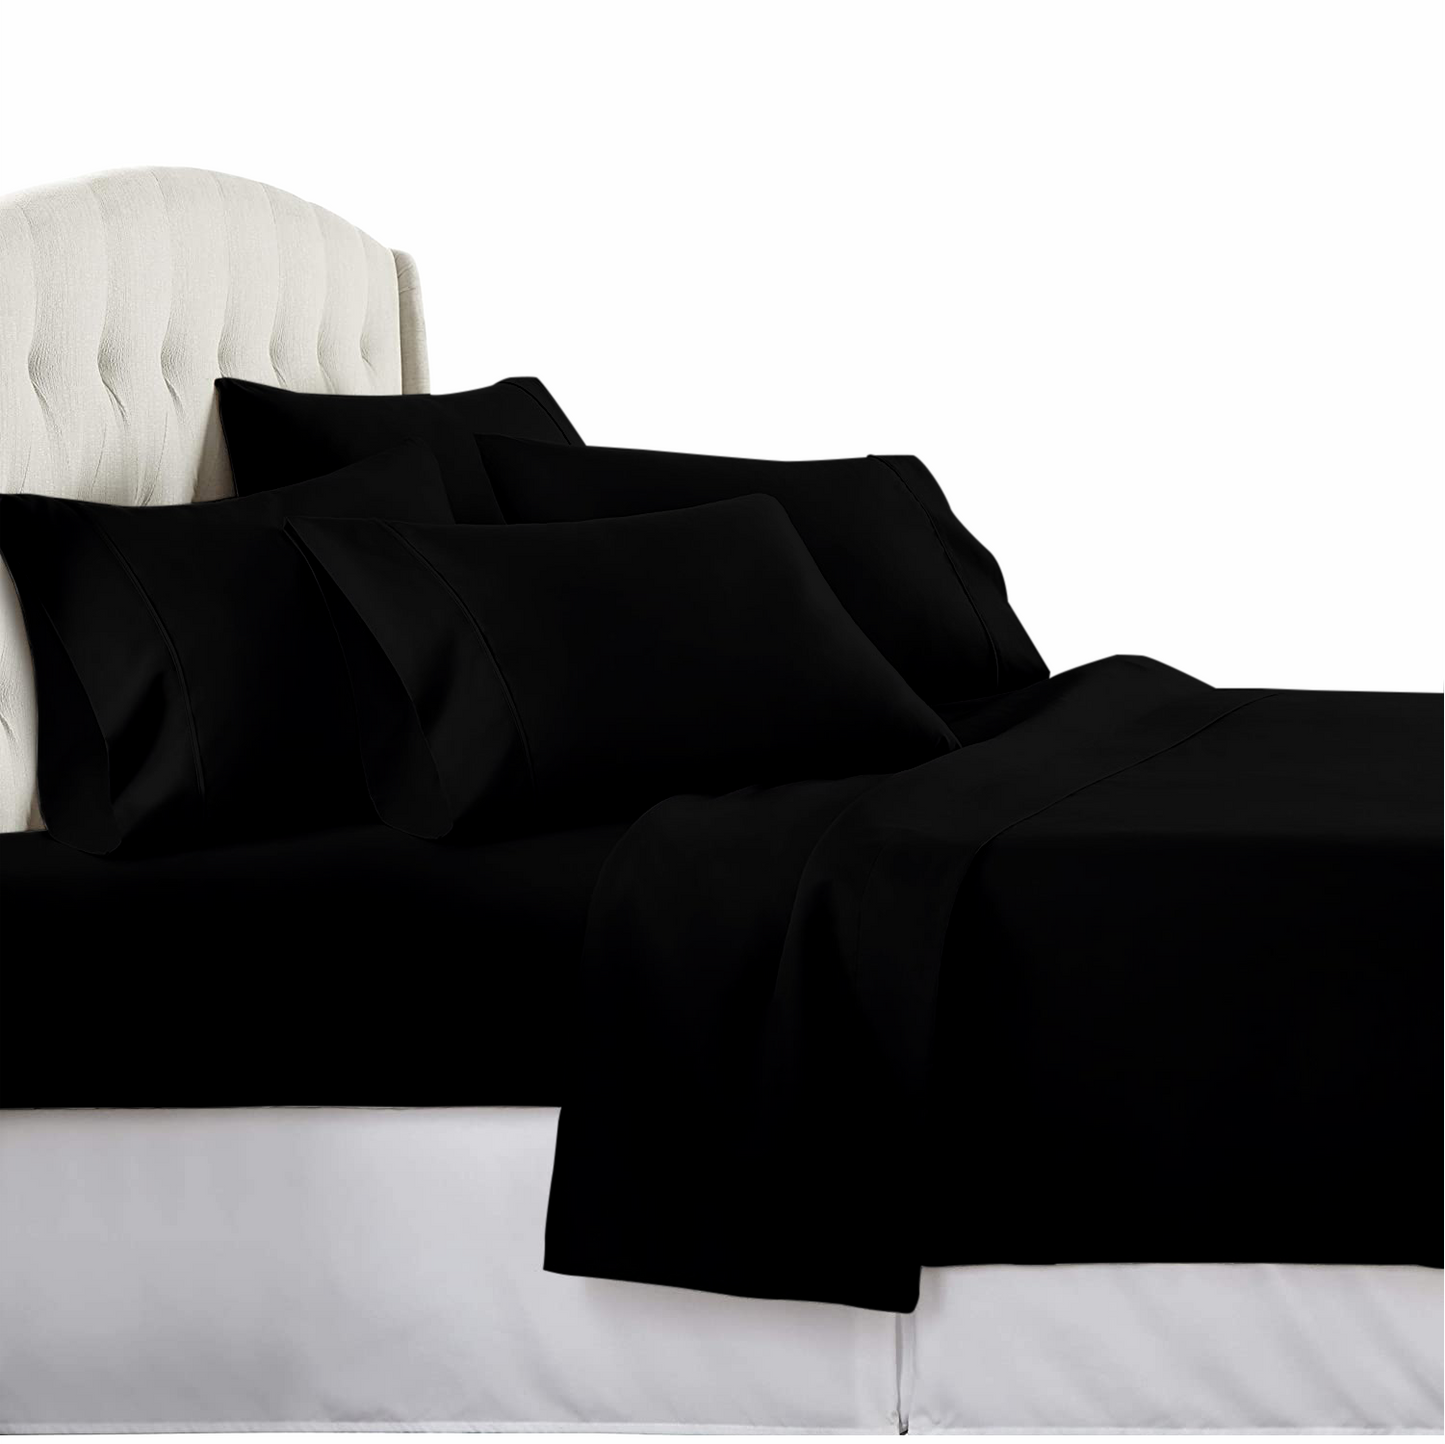 Queen Bed Sheet Set Cotton 300 TC - 1 Flat Sheet and 2 Pillow Covers